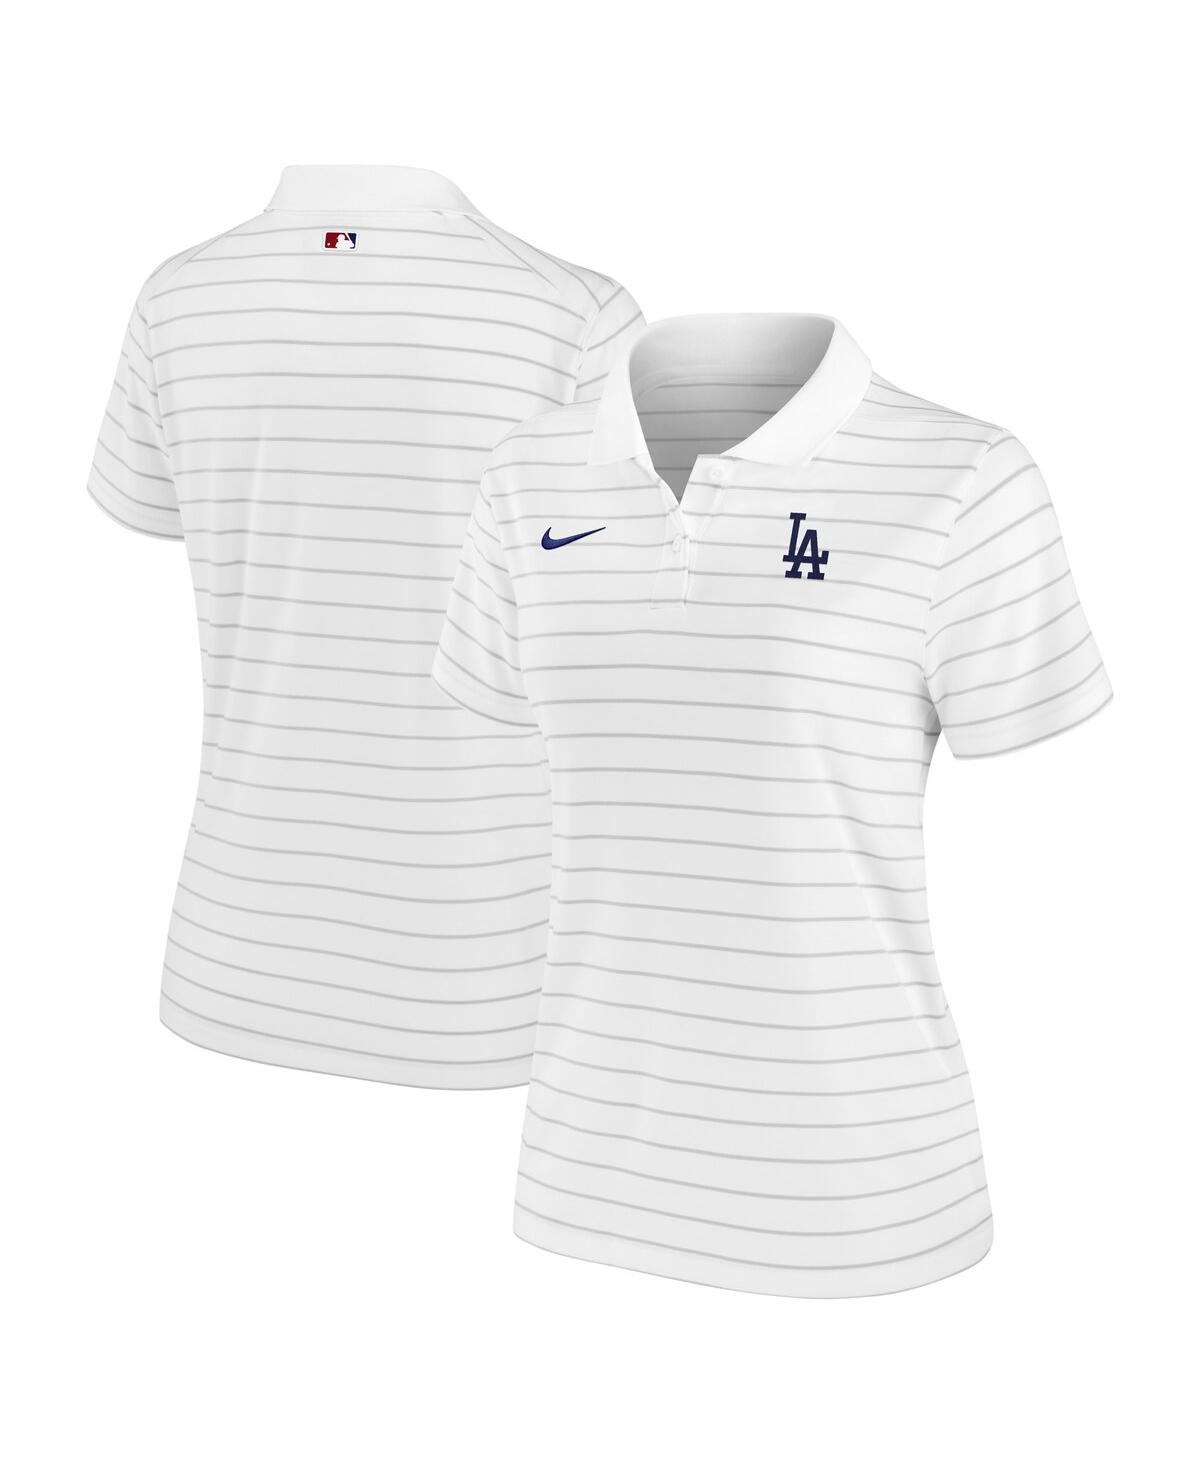 Women's Nike White Los Angeles Dodgers Authentic Collection Victory Performance Polo Shirt - White